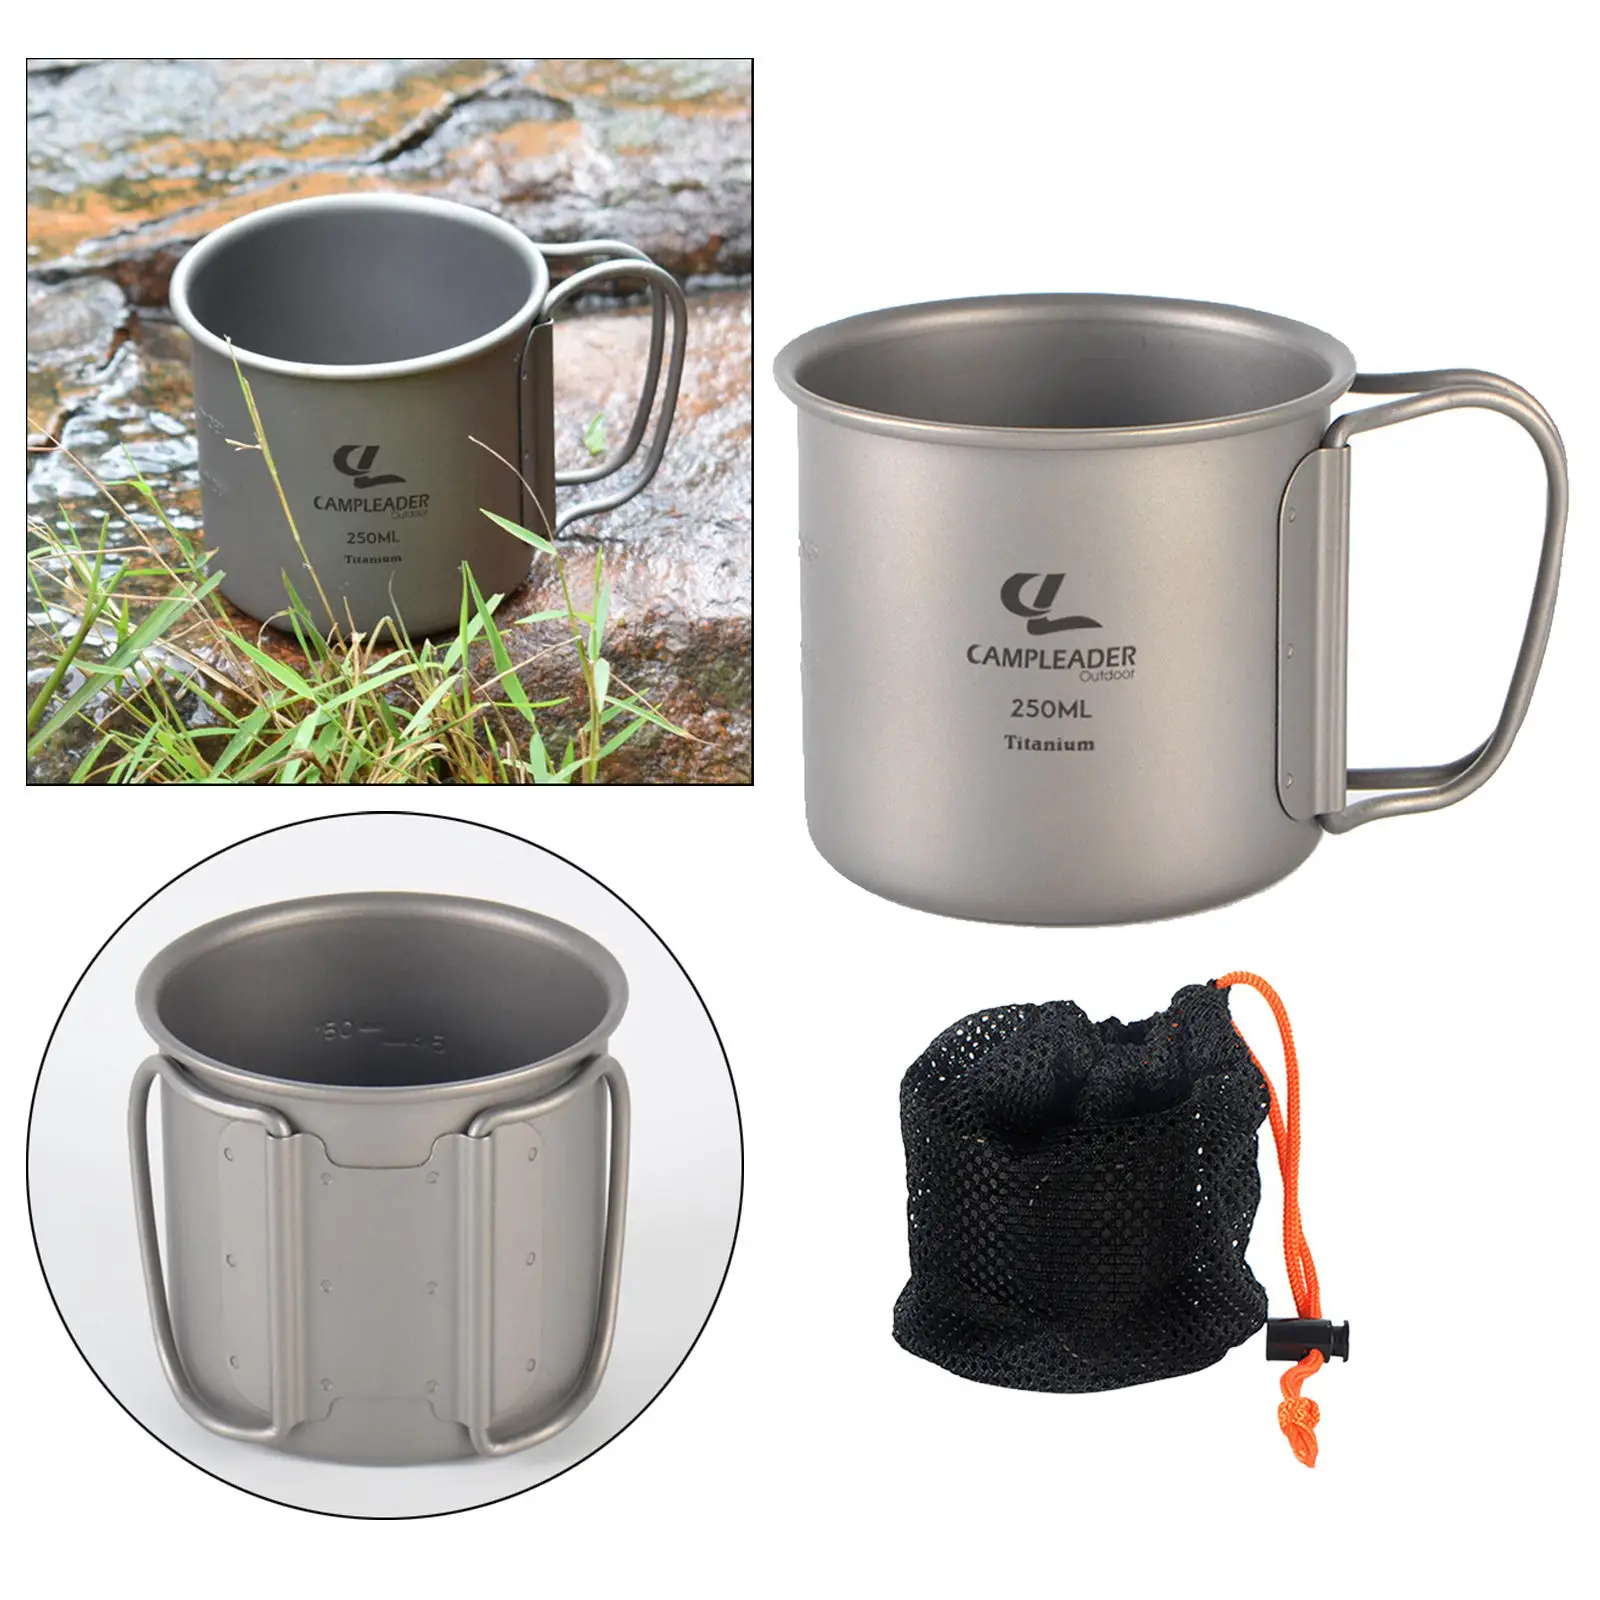 250ml Titanium Collapsible Camping Mug Hiking Water Cup Drinkware Only 40g